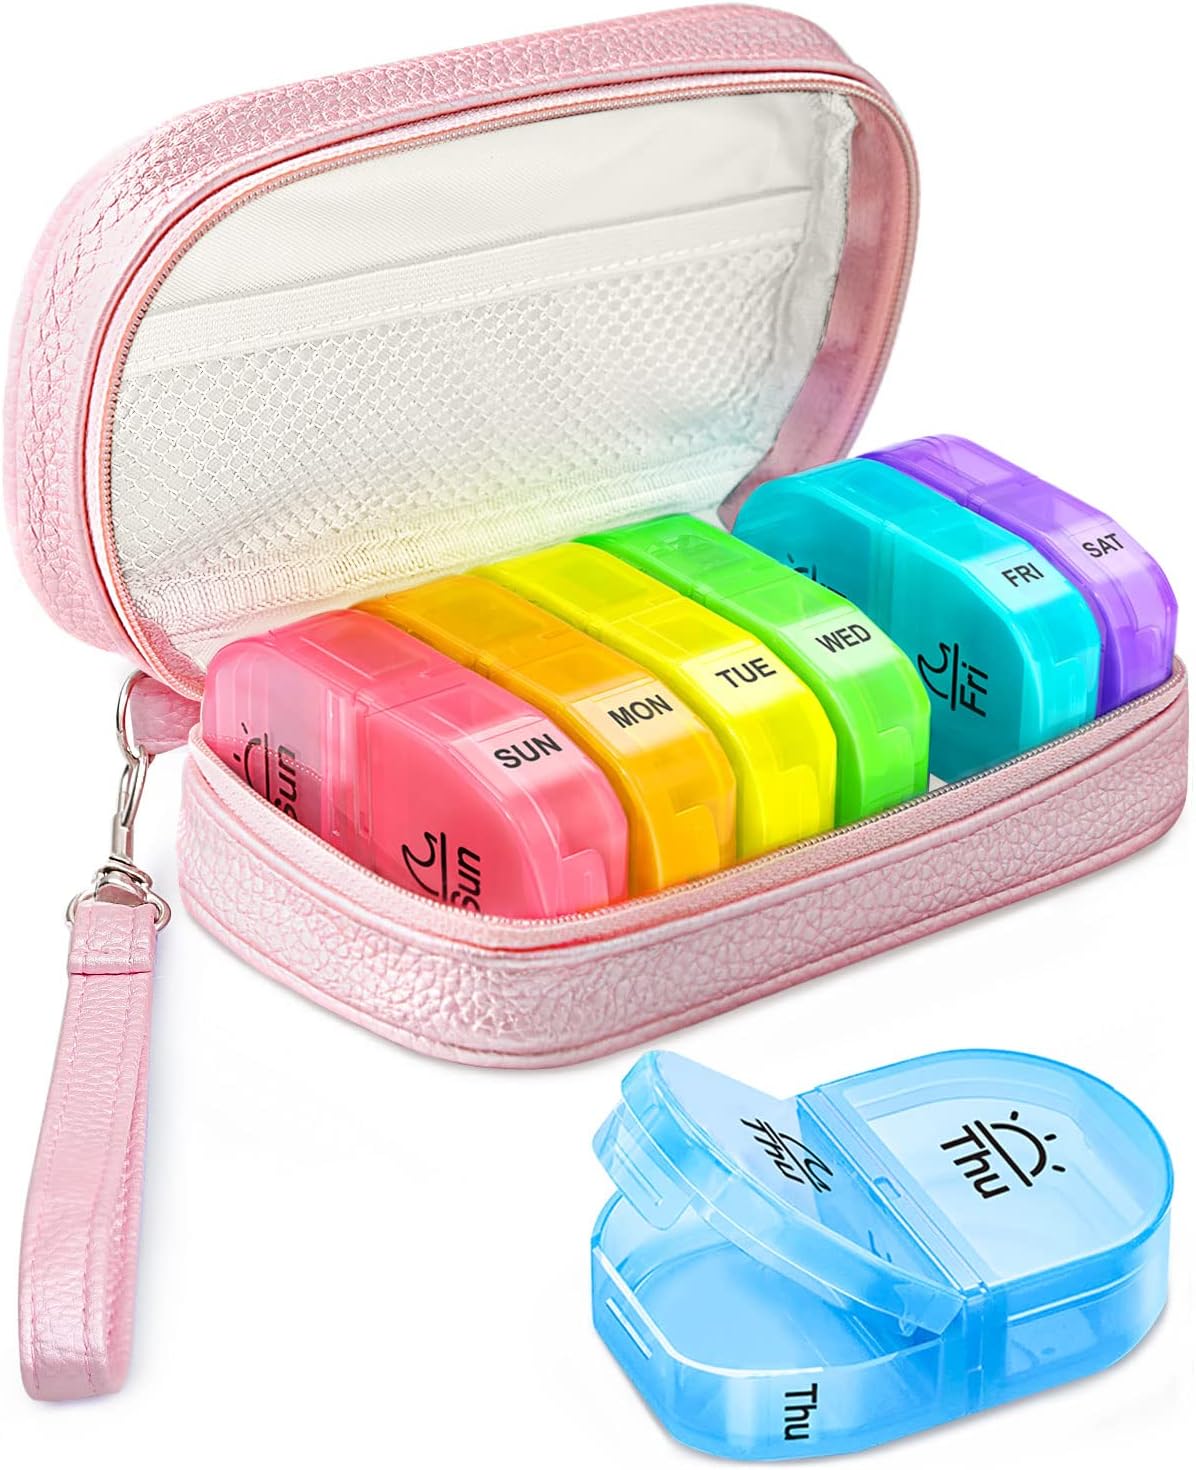 It' the perfect size, most other pill organizers are really big but this is easy to carry around in a purse daily because it' small enough. It' also good quality and cute.